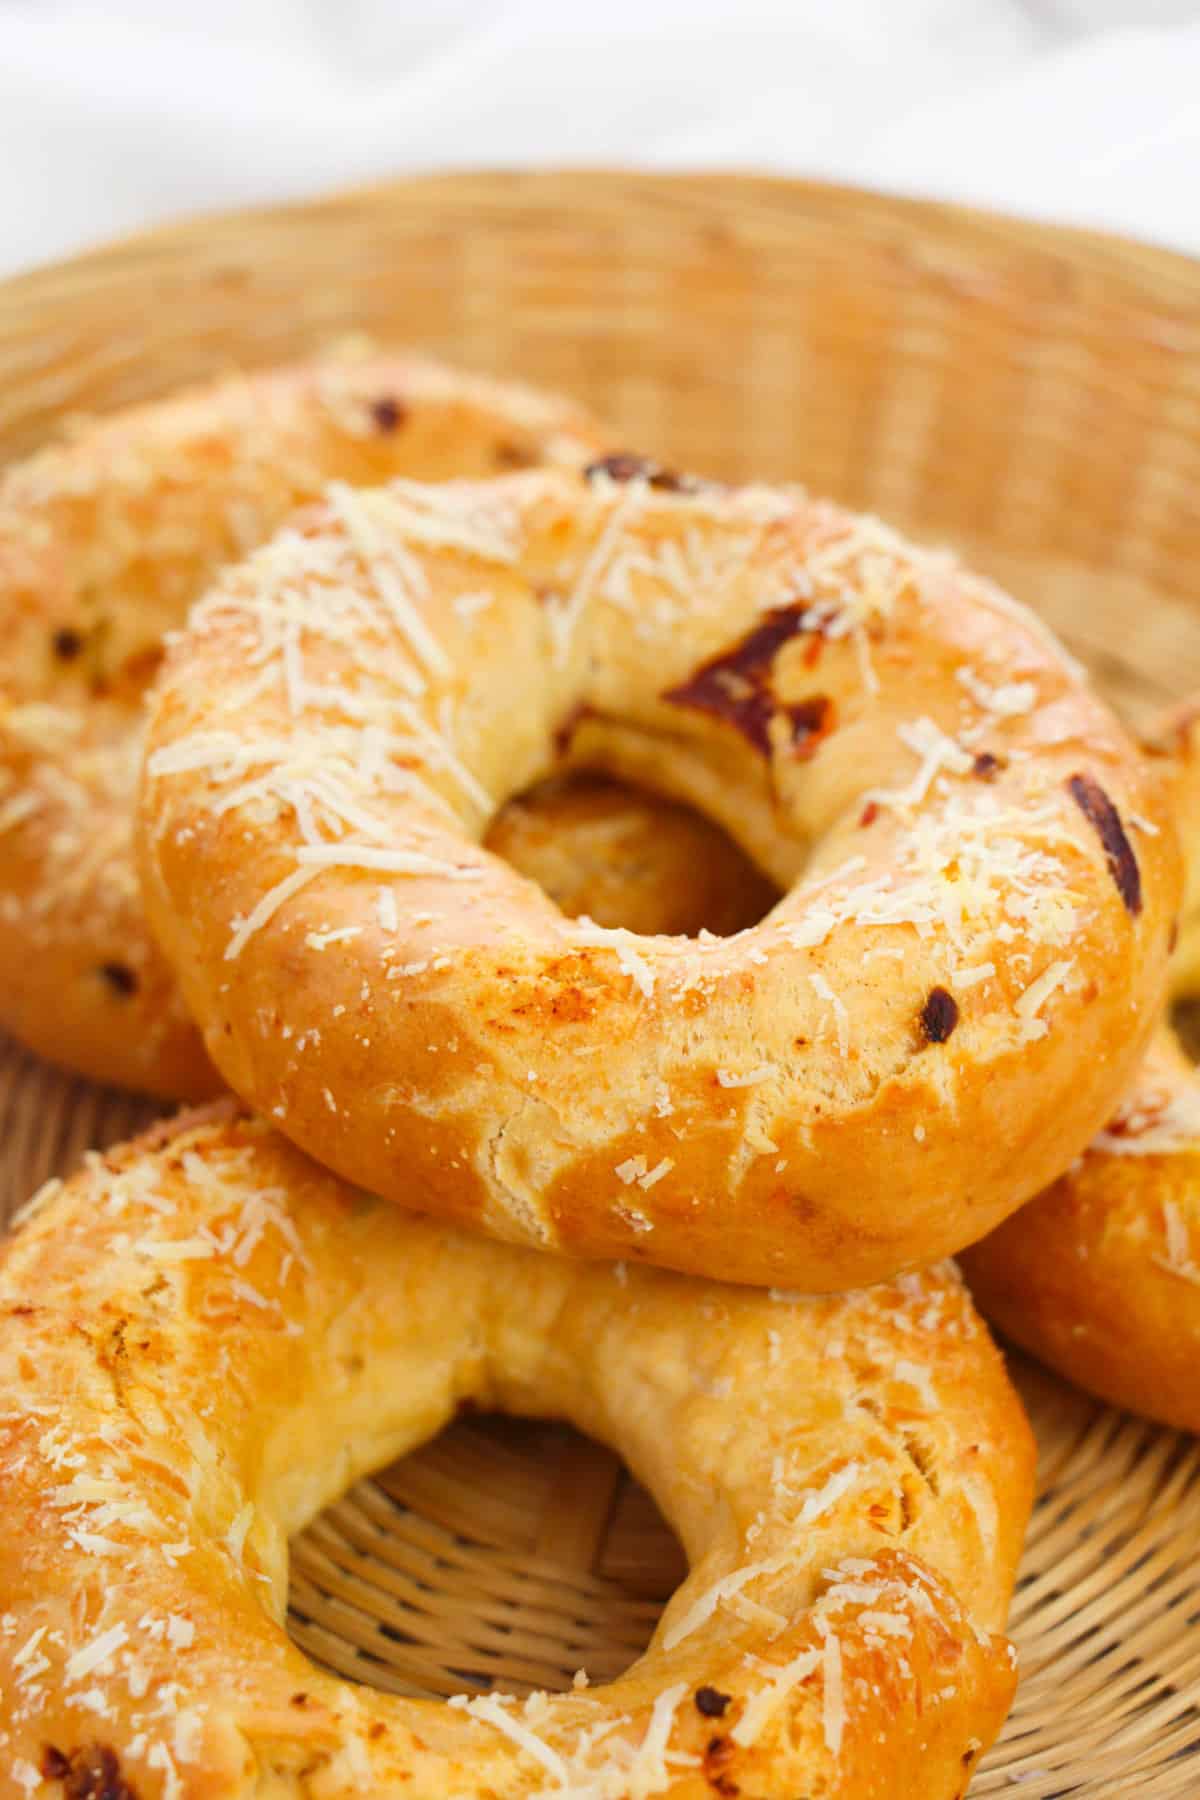 3 ingredient bagels with sundried tomato bagels using the weight watchers bagel recipe, in a basket.